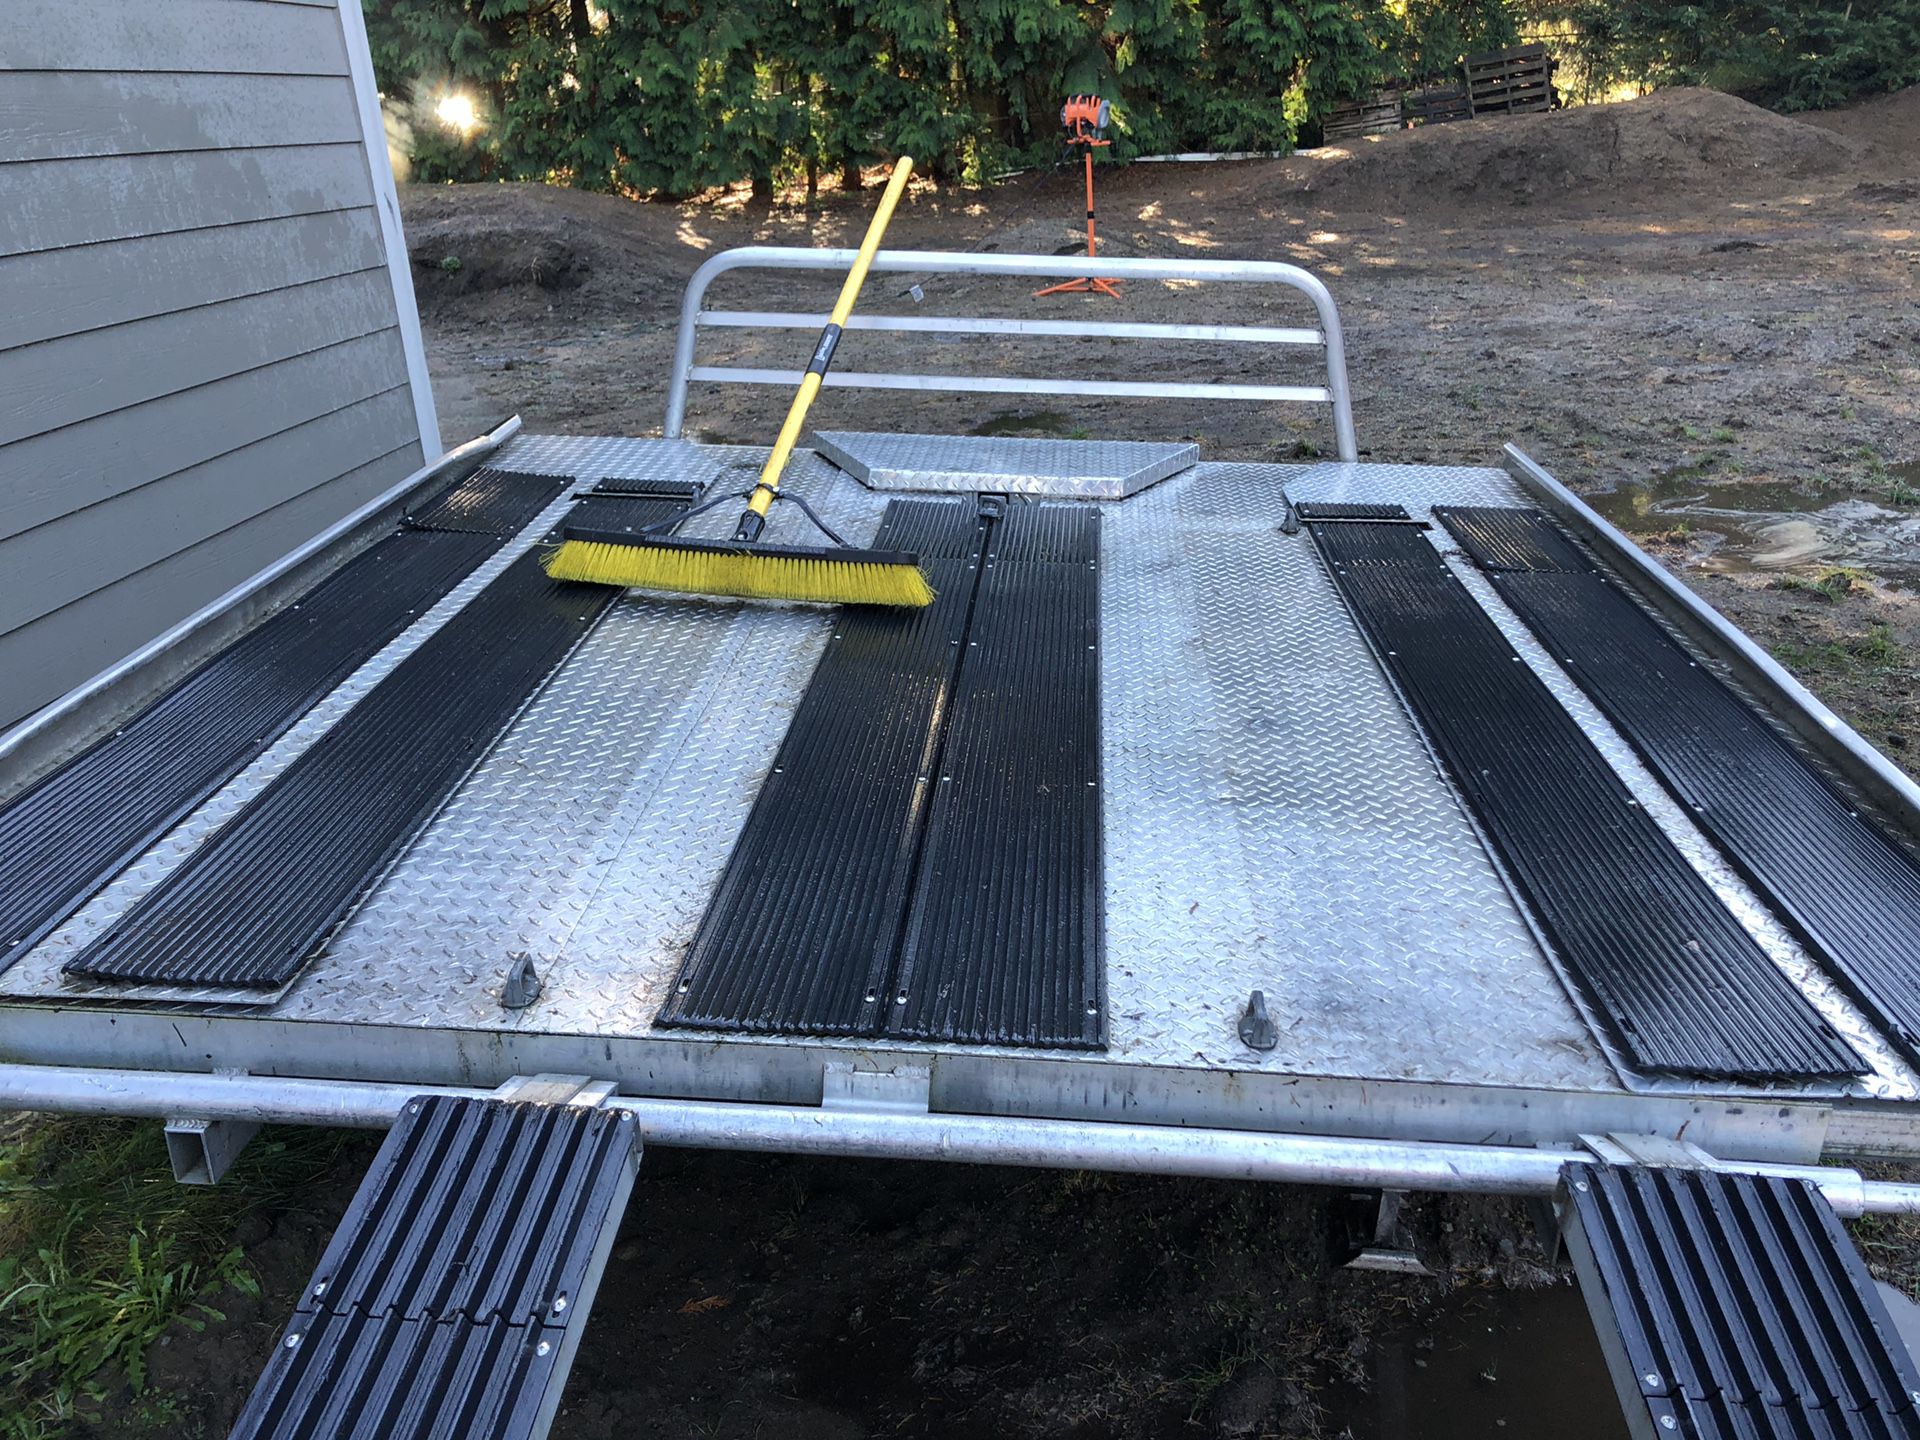 Sled deck for snowmobile